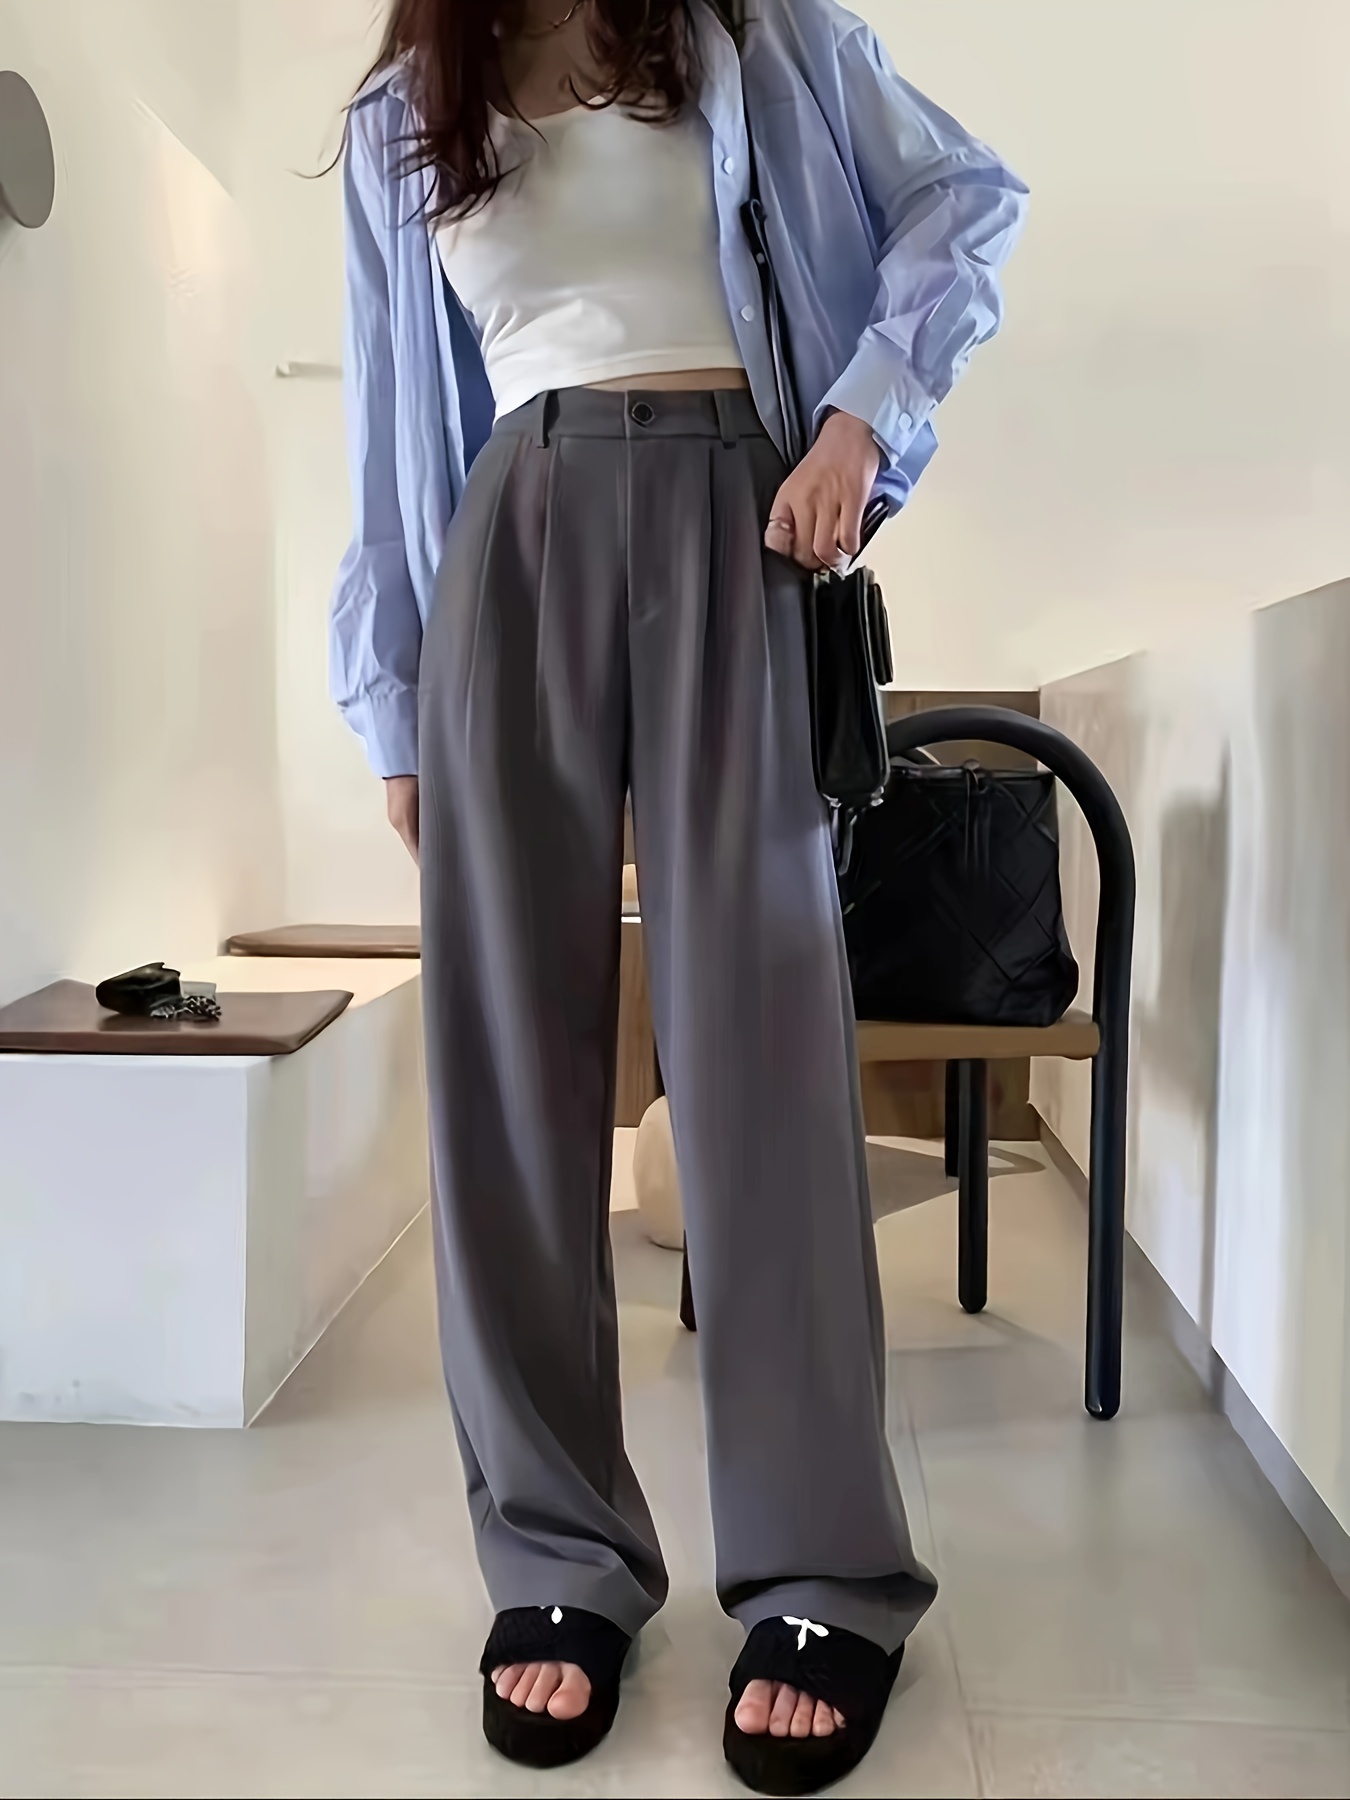 Yitimuceng Grey Wide Leg Pants for Women New High Waisted Korean Fashion  Casual Straight Pants Ladies Full Length Suits Pants